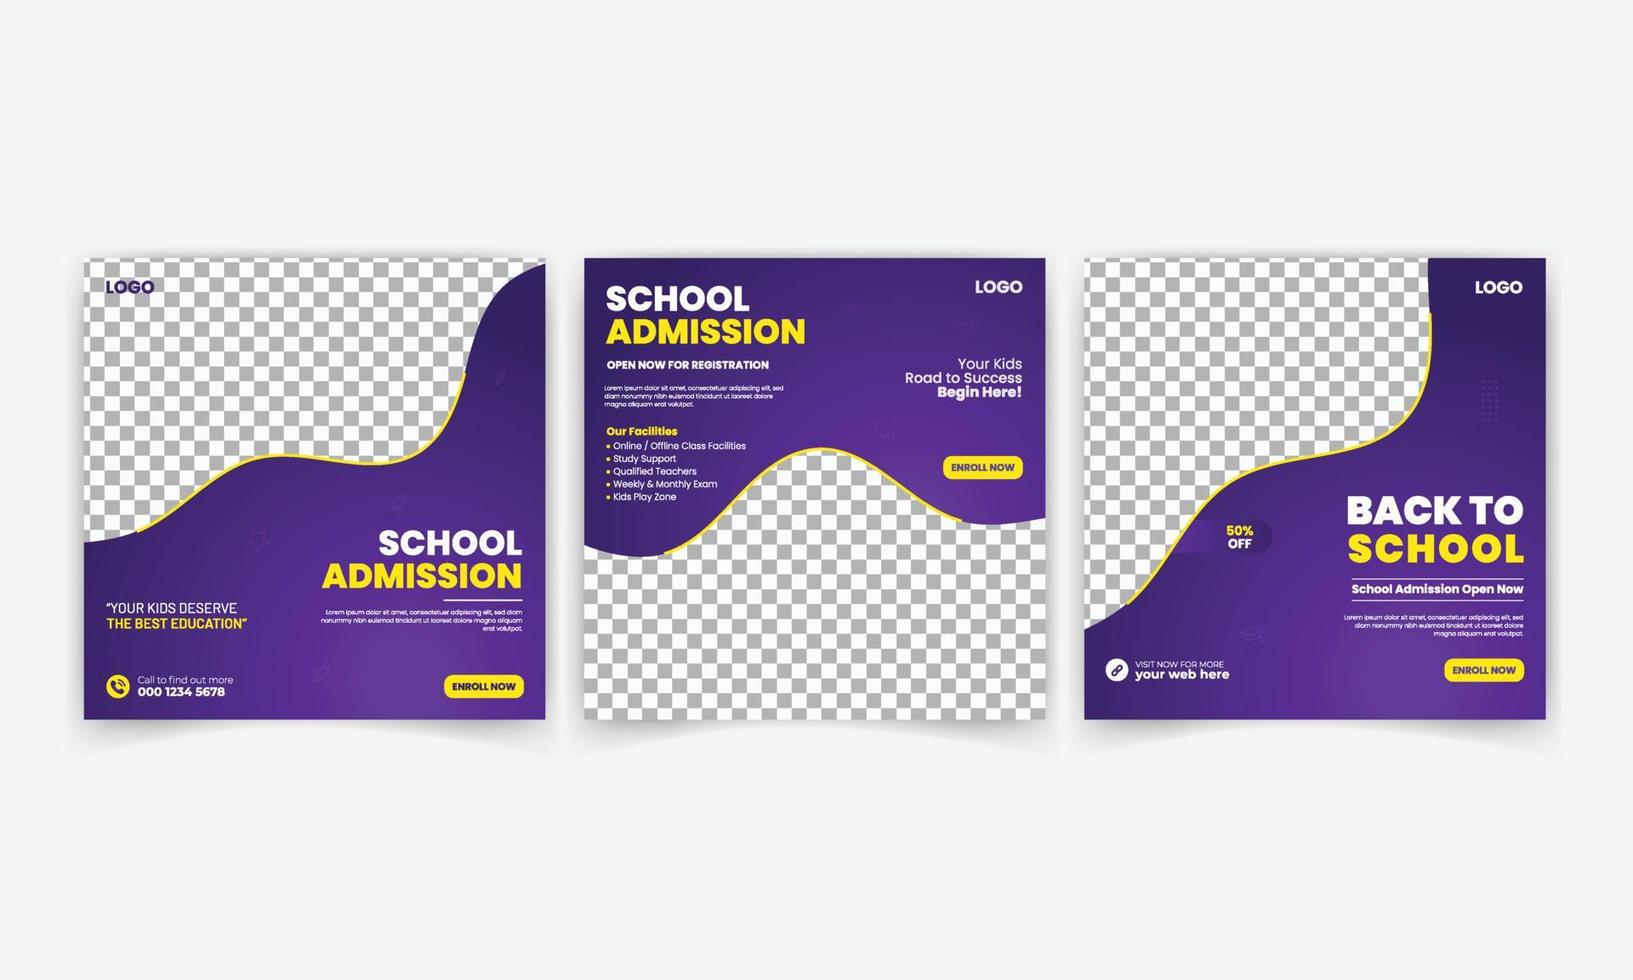 Back to school get admission promotion social media post banner template vector